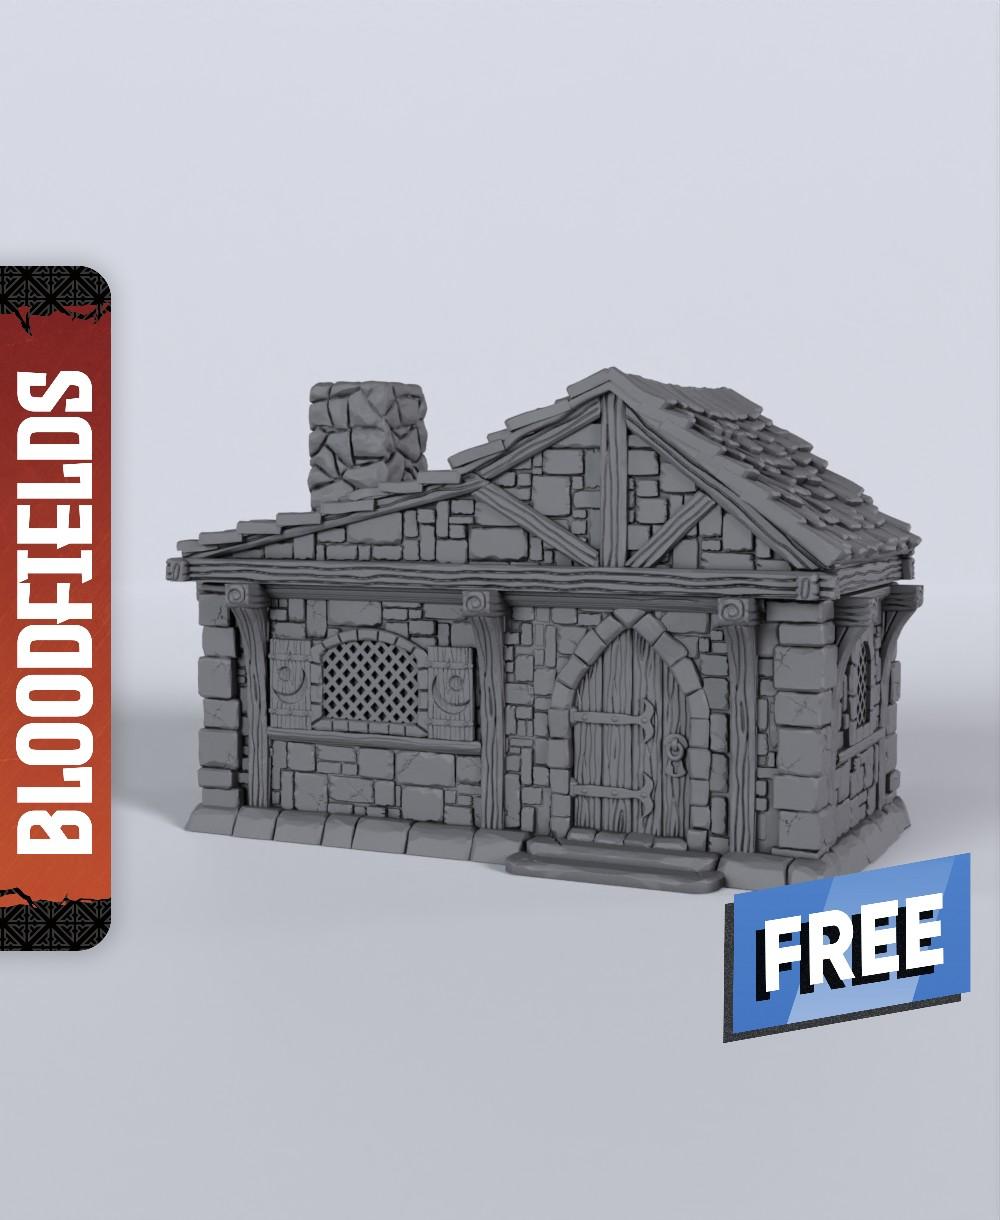 Small Building A - With Free Dragon Warhammer - 5e DnD Inspired for RPG and Wargamers 3d model